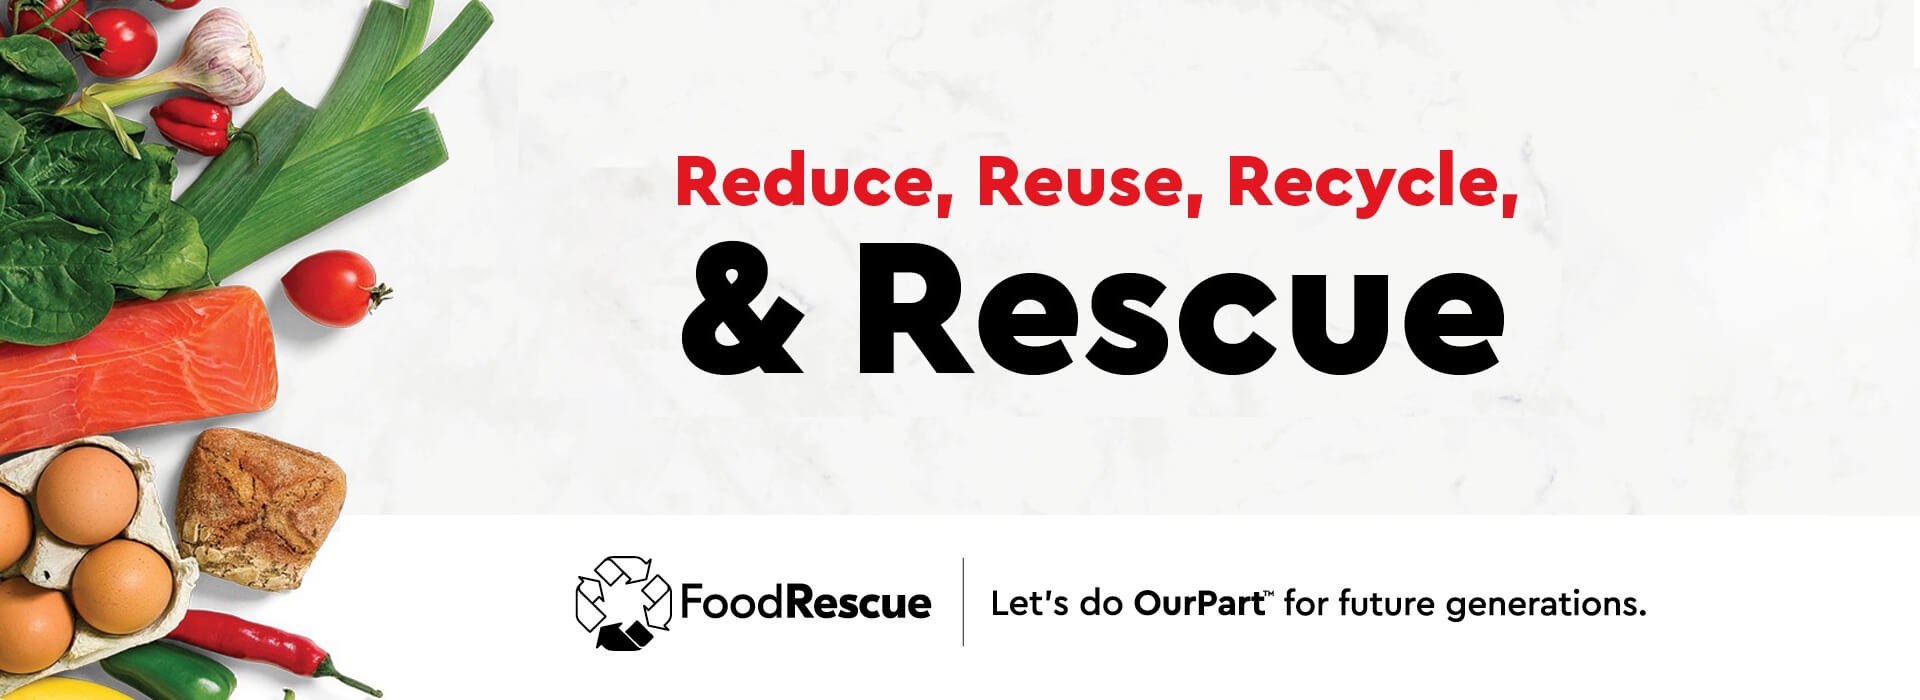 Reduce reuse recycle and rescue